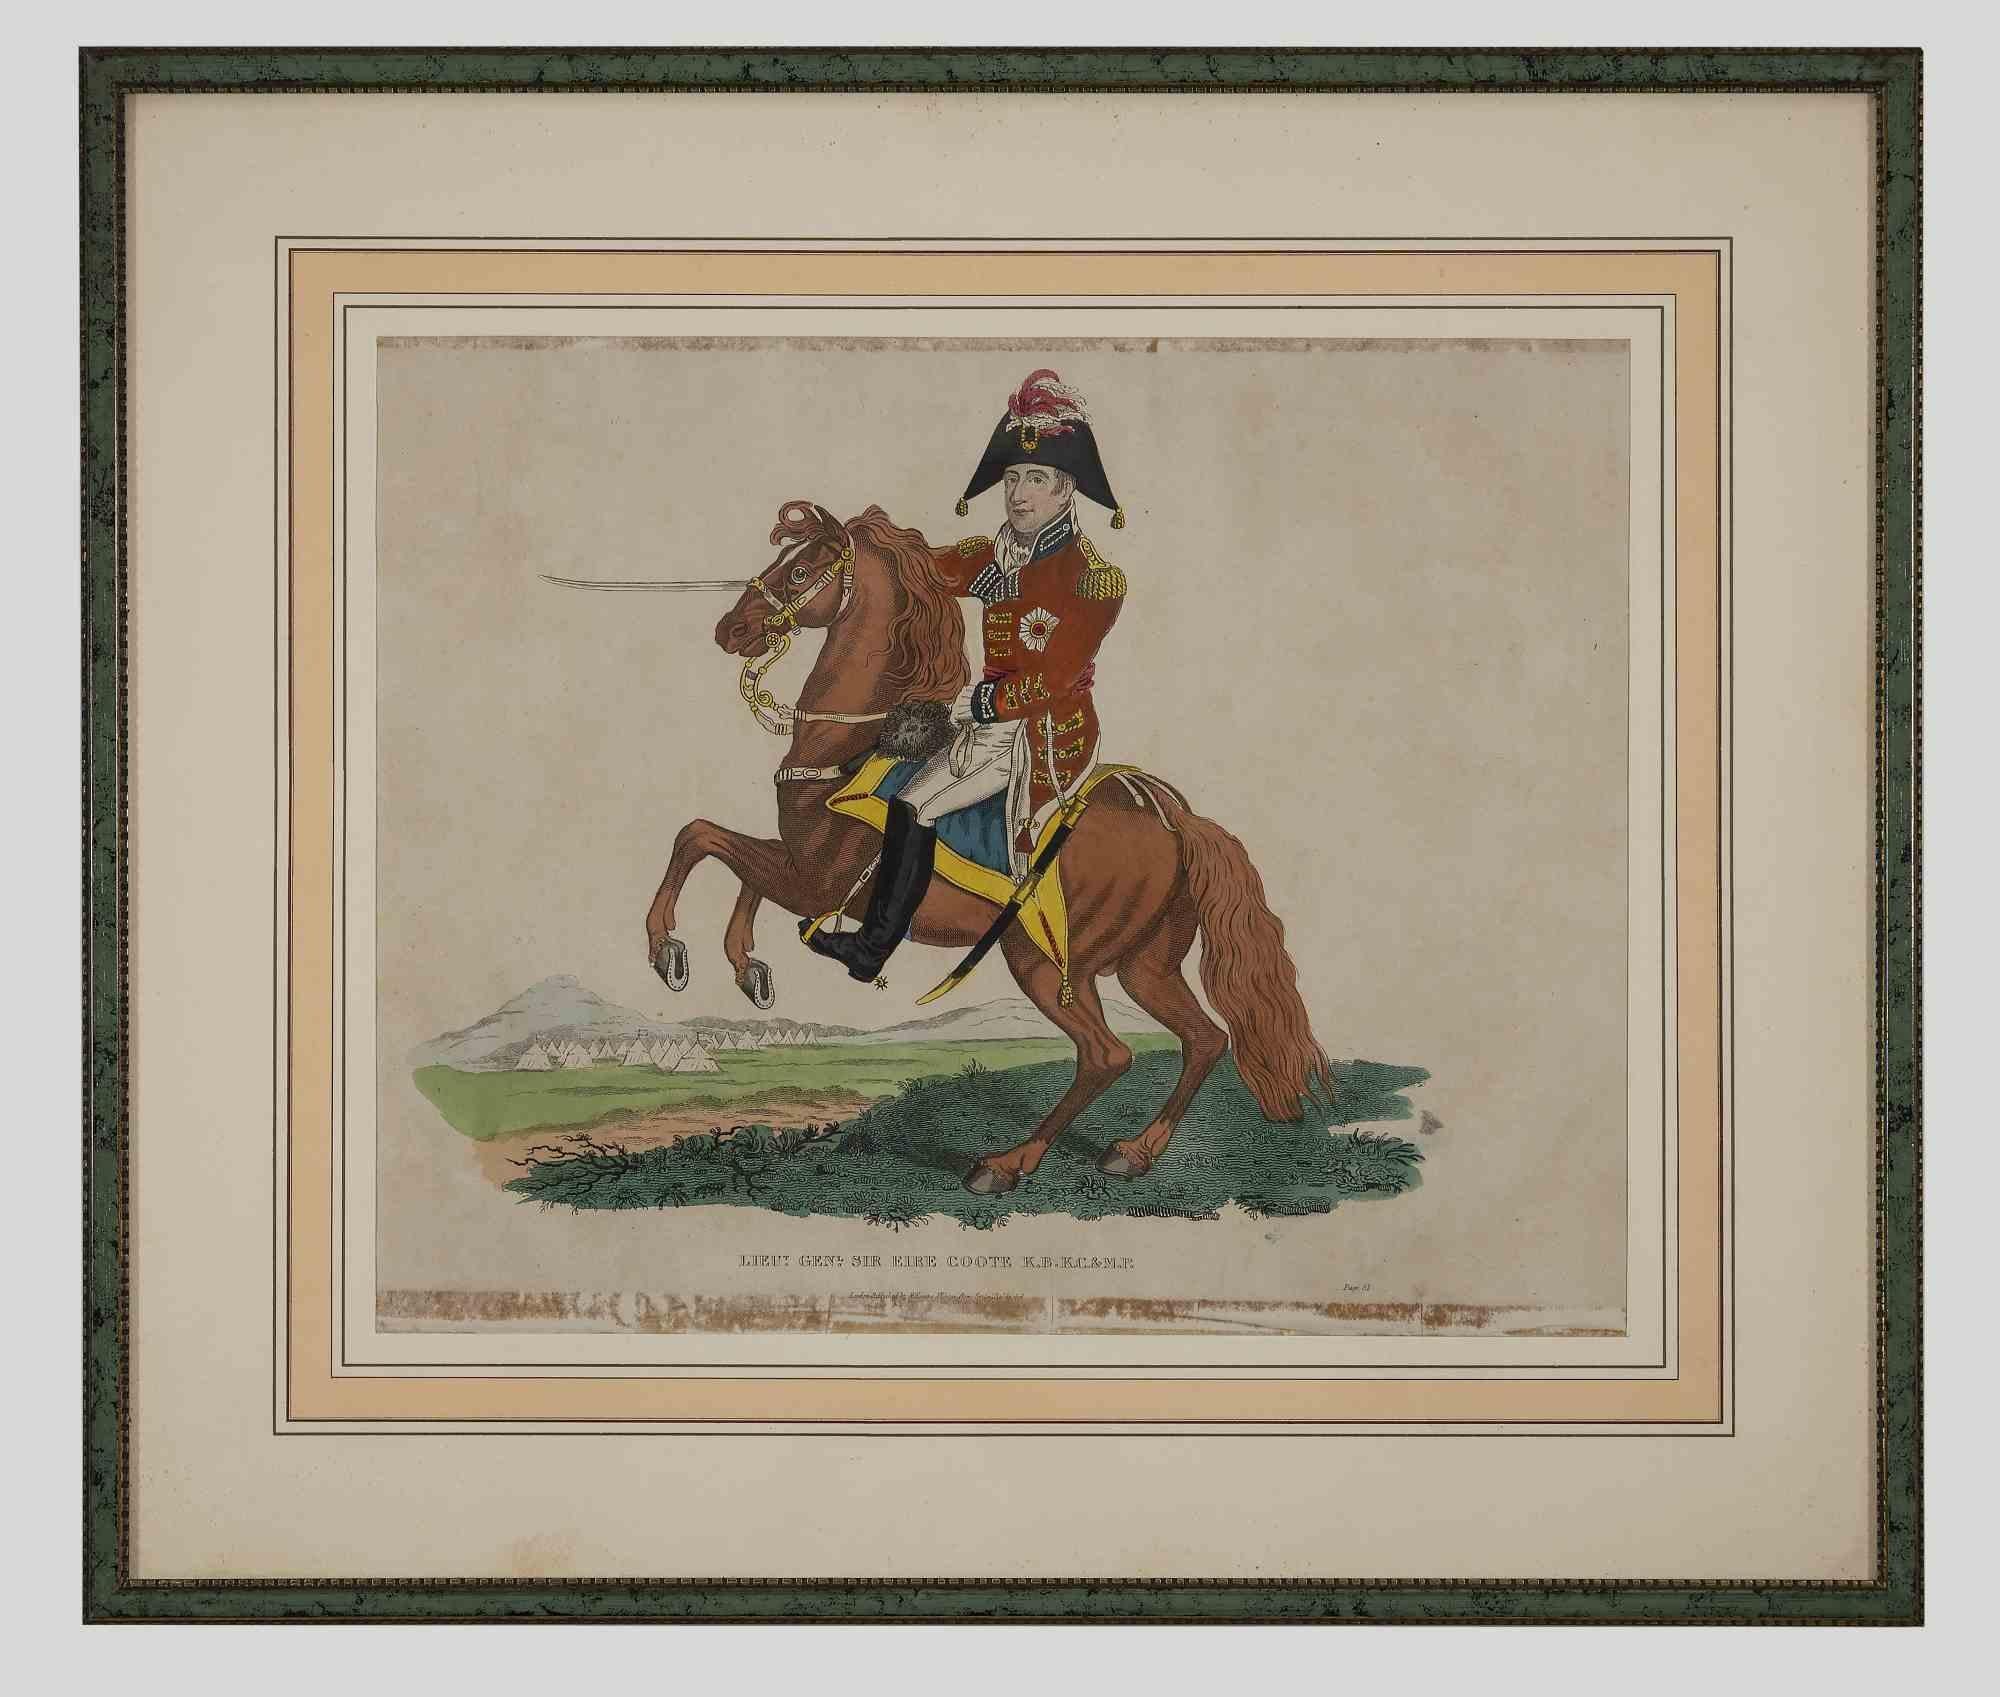 General Sir Eire Coote - Original Water-colored Lithograph - 1816 - Mixed Media Art by Unknown